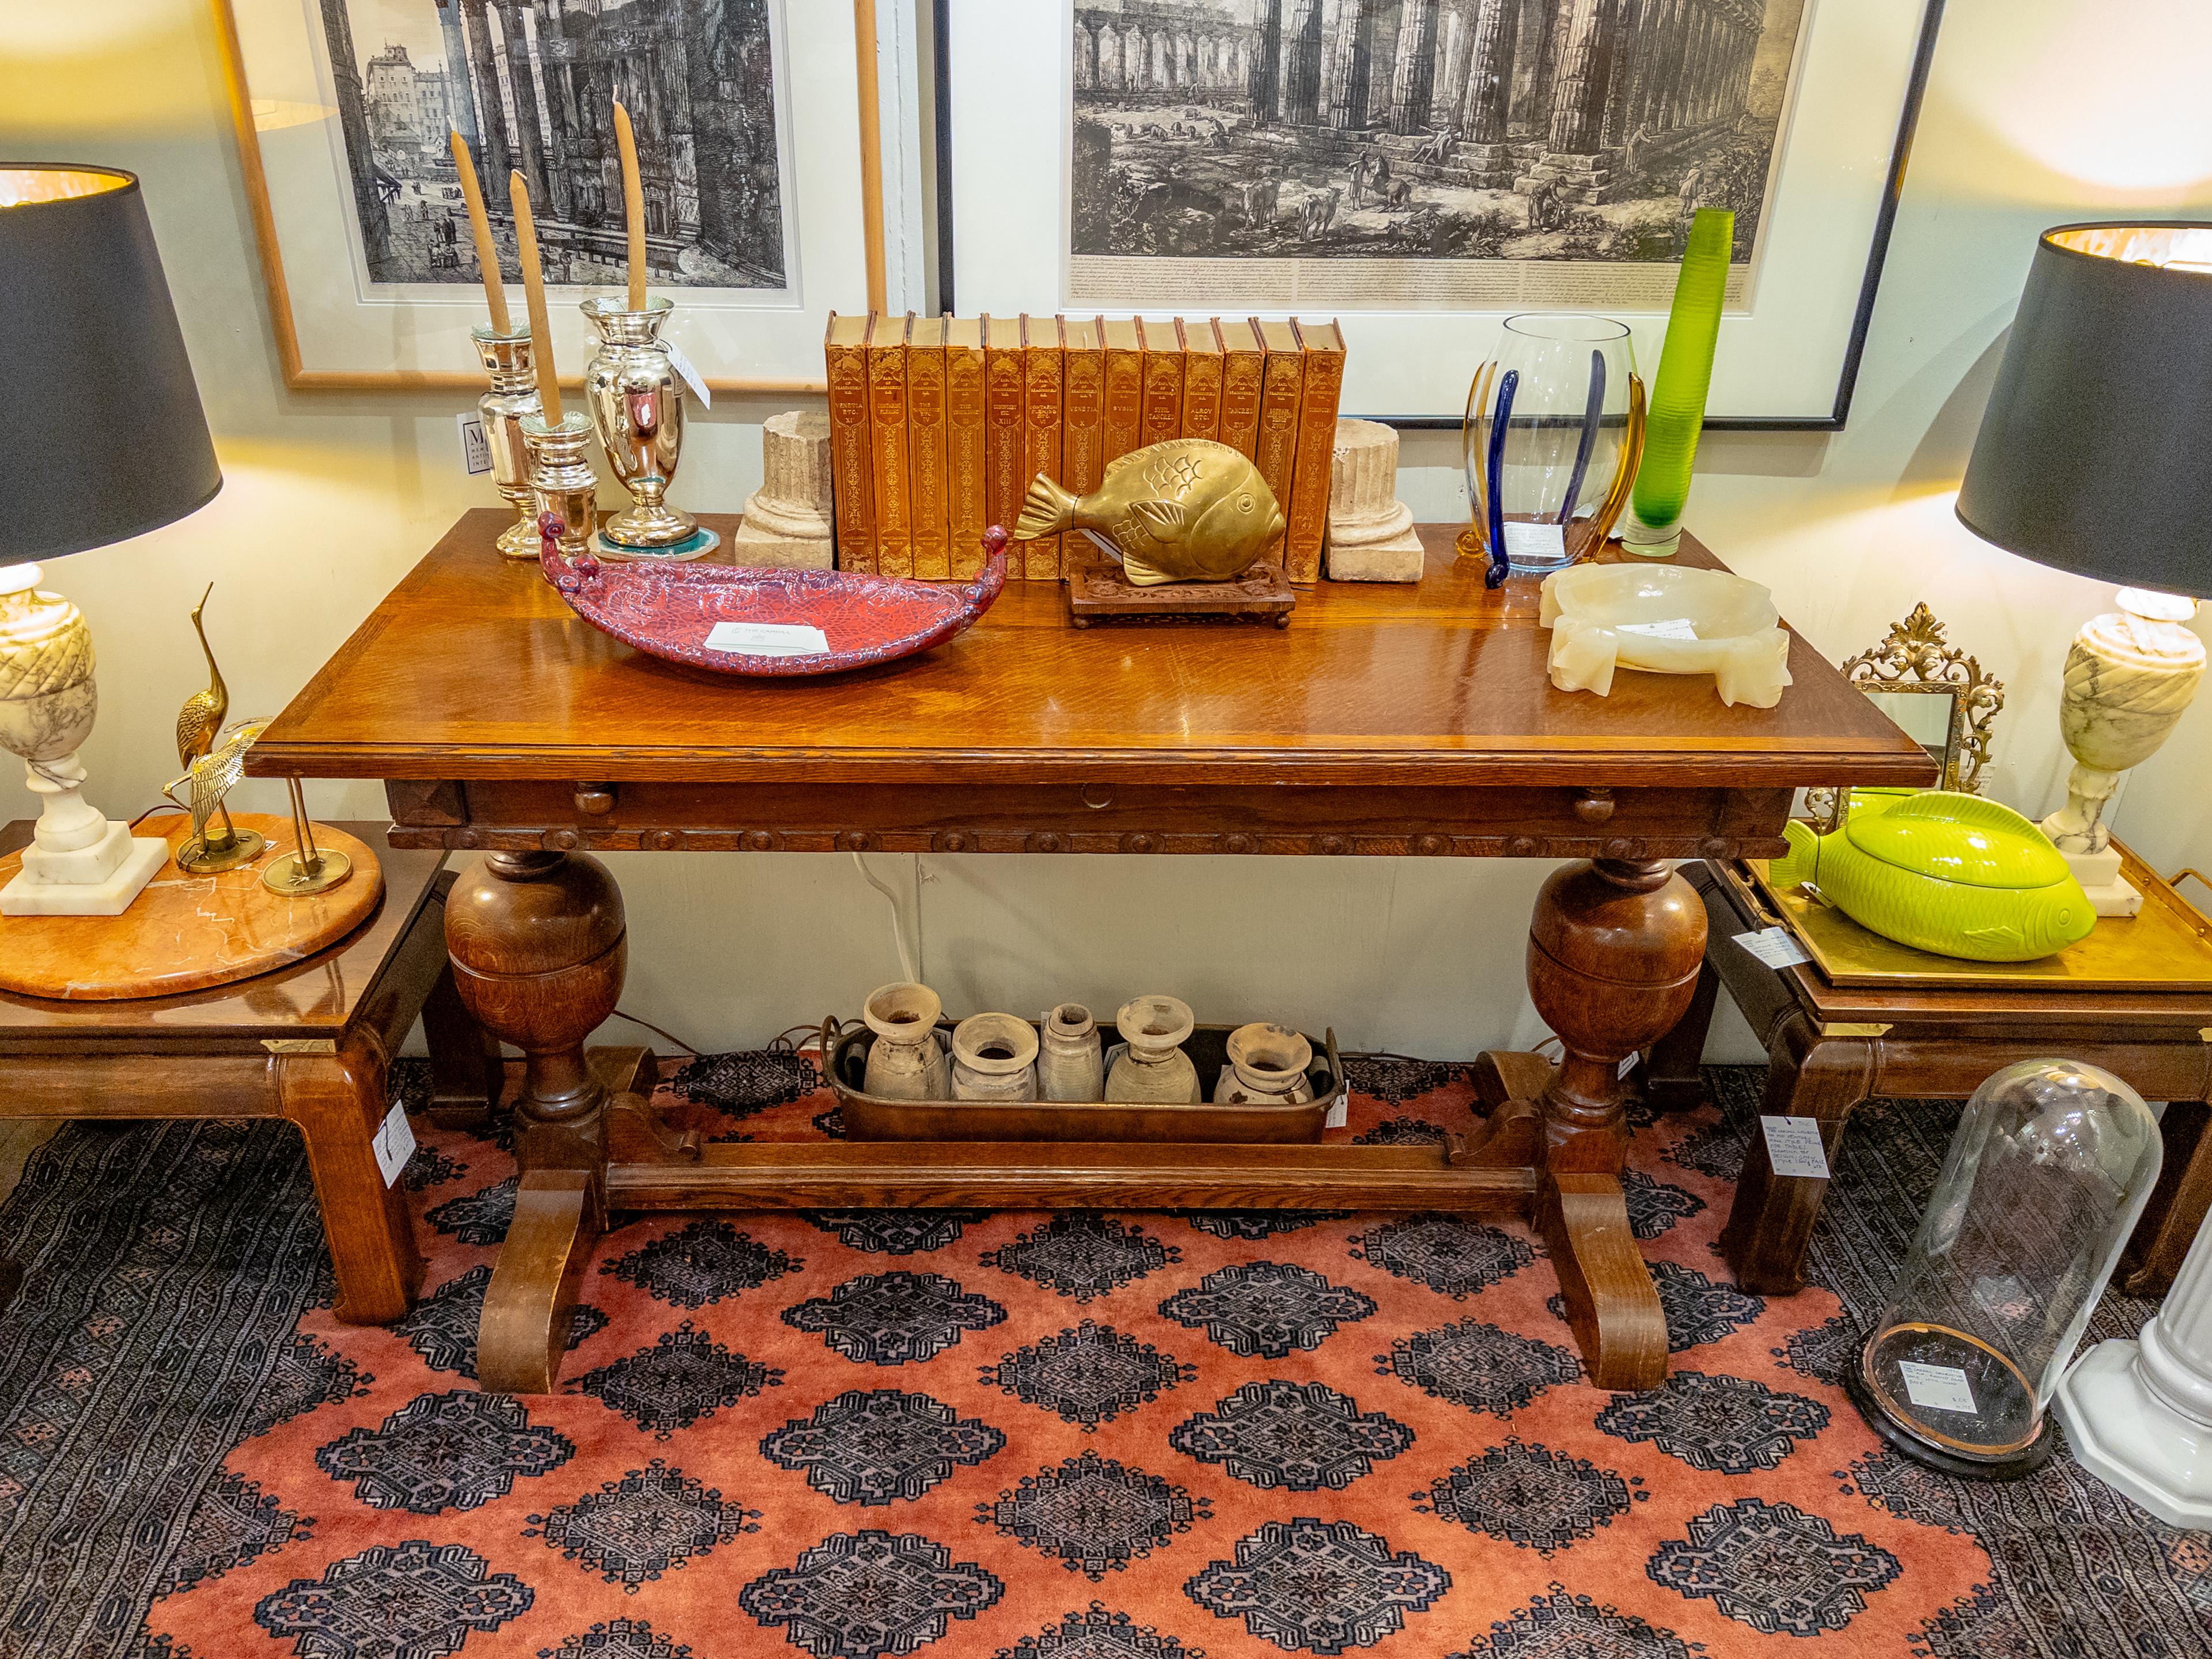 antique trestle table with leaves